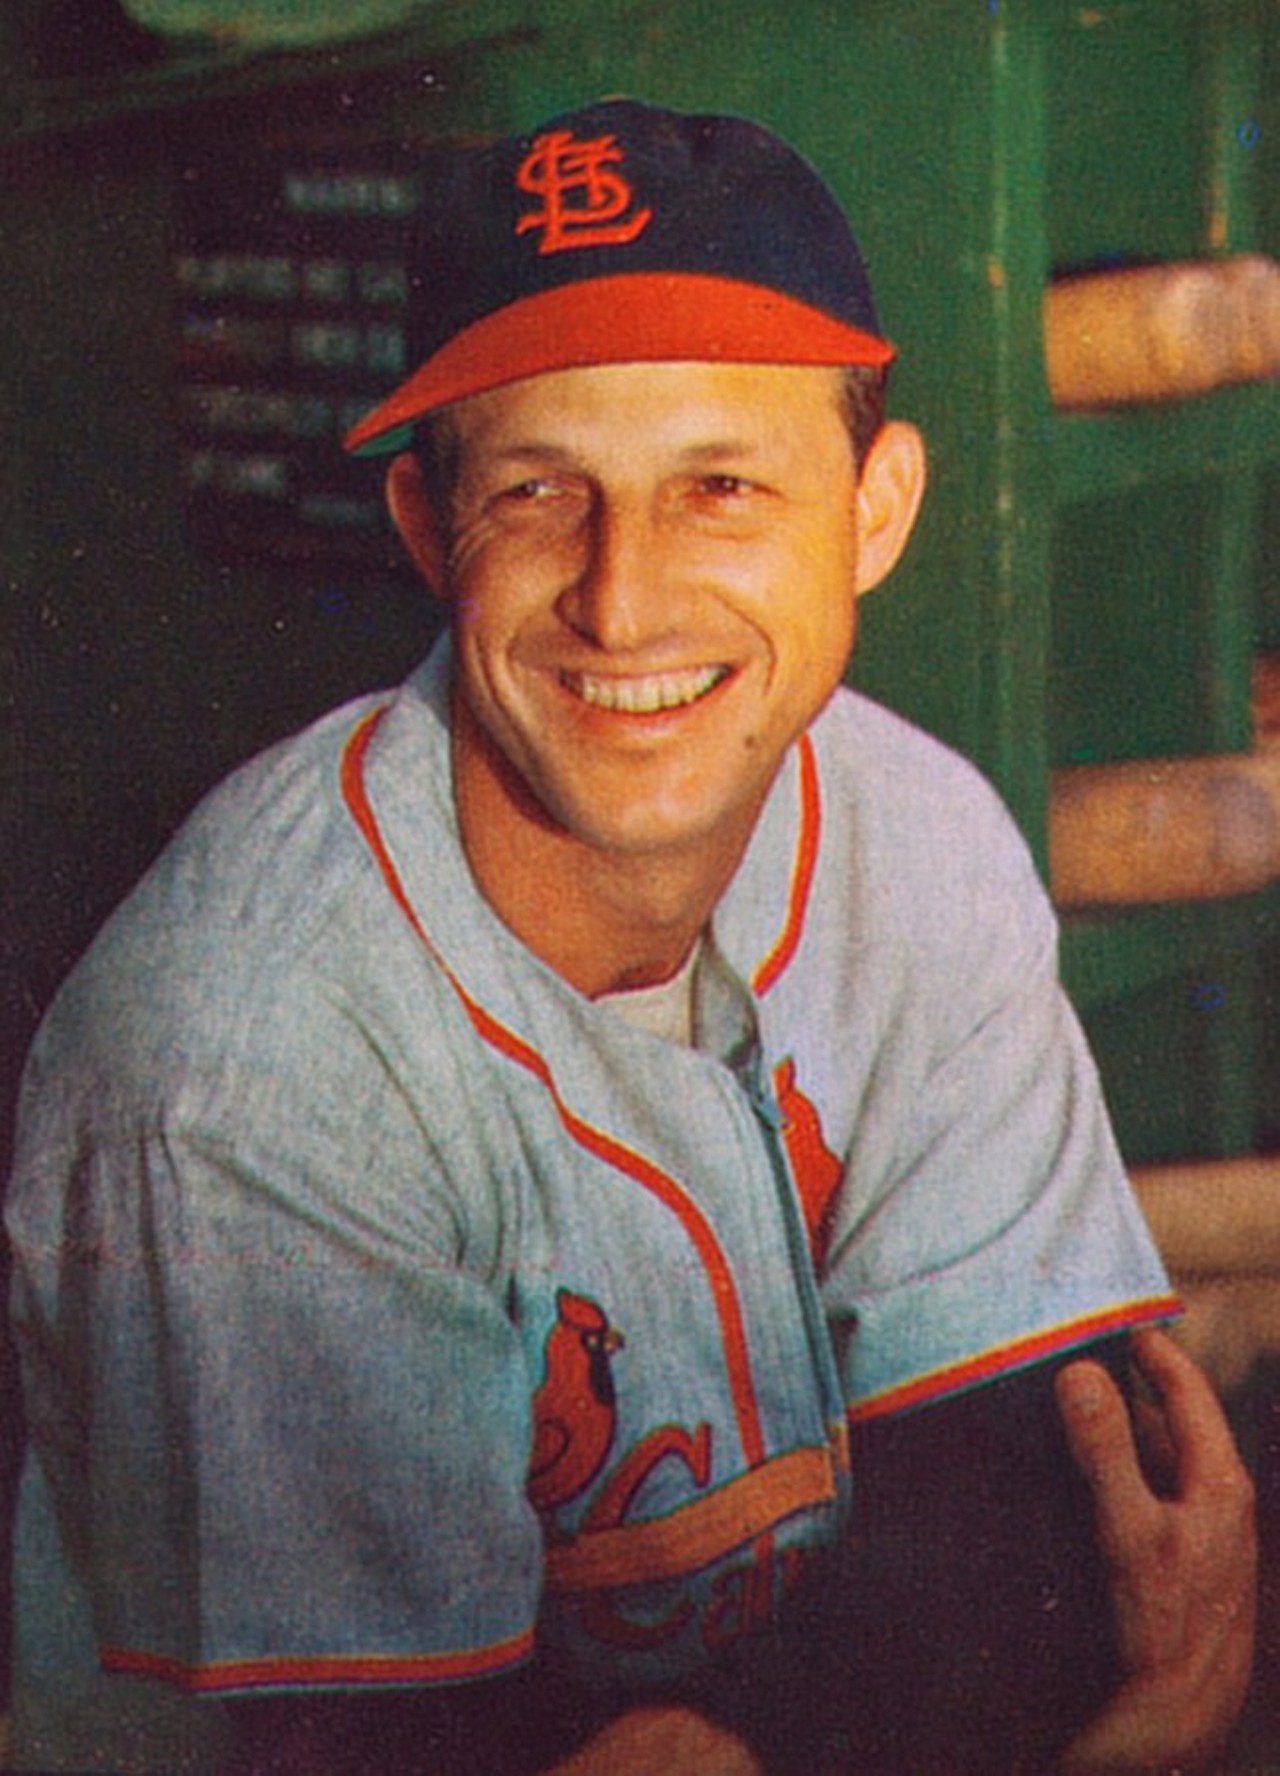 Stanley Musial
Stan Musial, St. Louis baseball giant, is buried in Bellerive Gardens Cemetery in Creve Coeur.
Photo credit: Wikimedia Commons